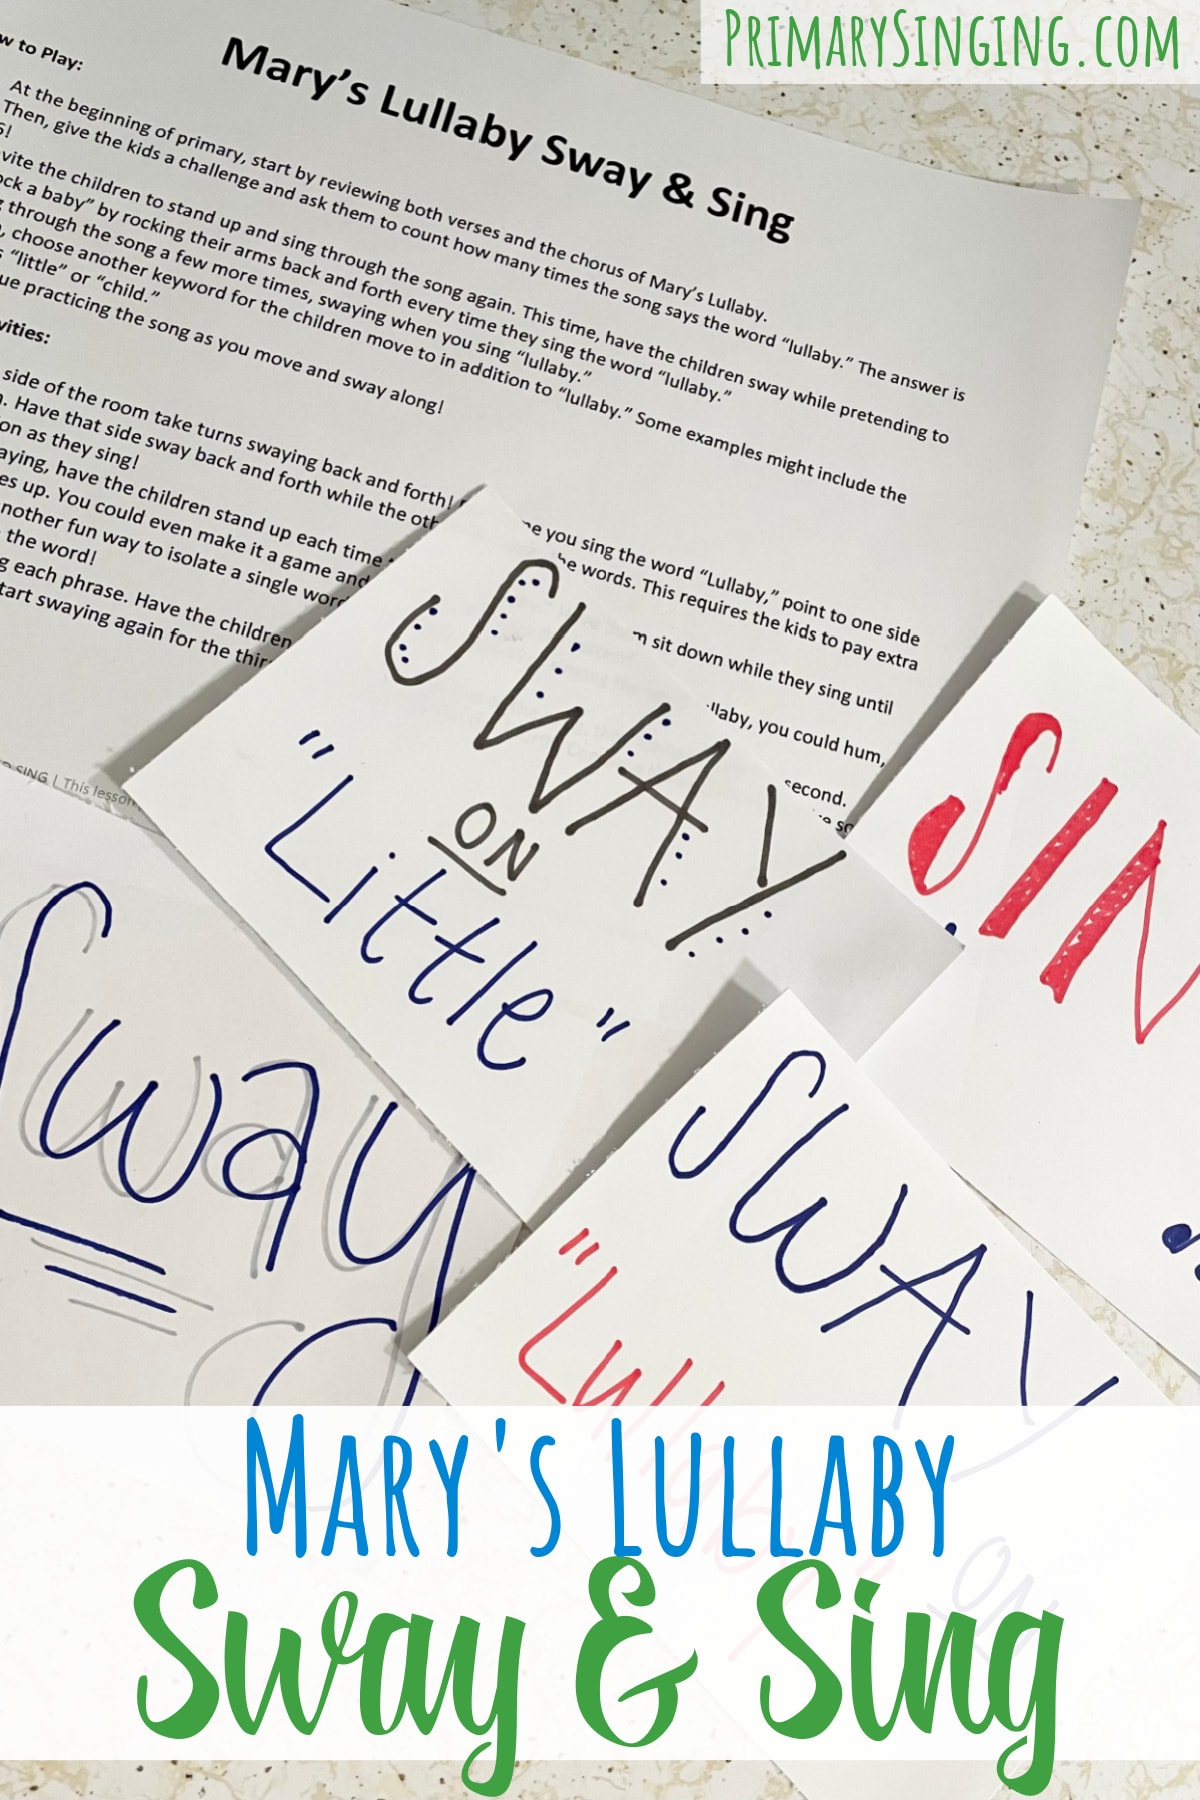 Mary's Lullaby Christmas Song Sway & Sing Easy ideas for Music Leaders Marys Lullaby Sway Sing